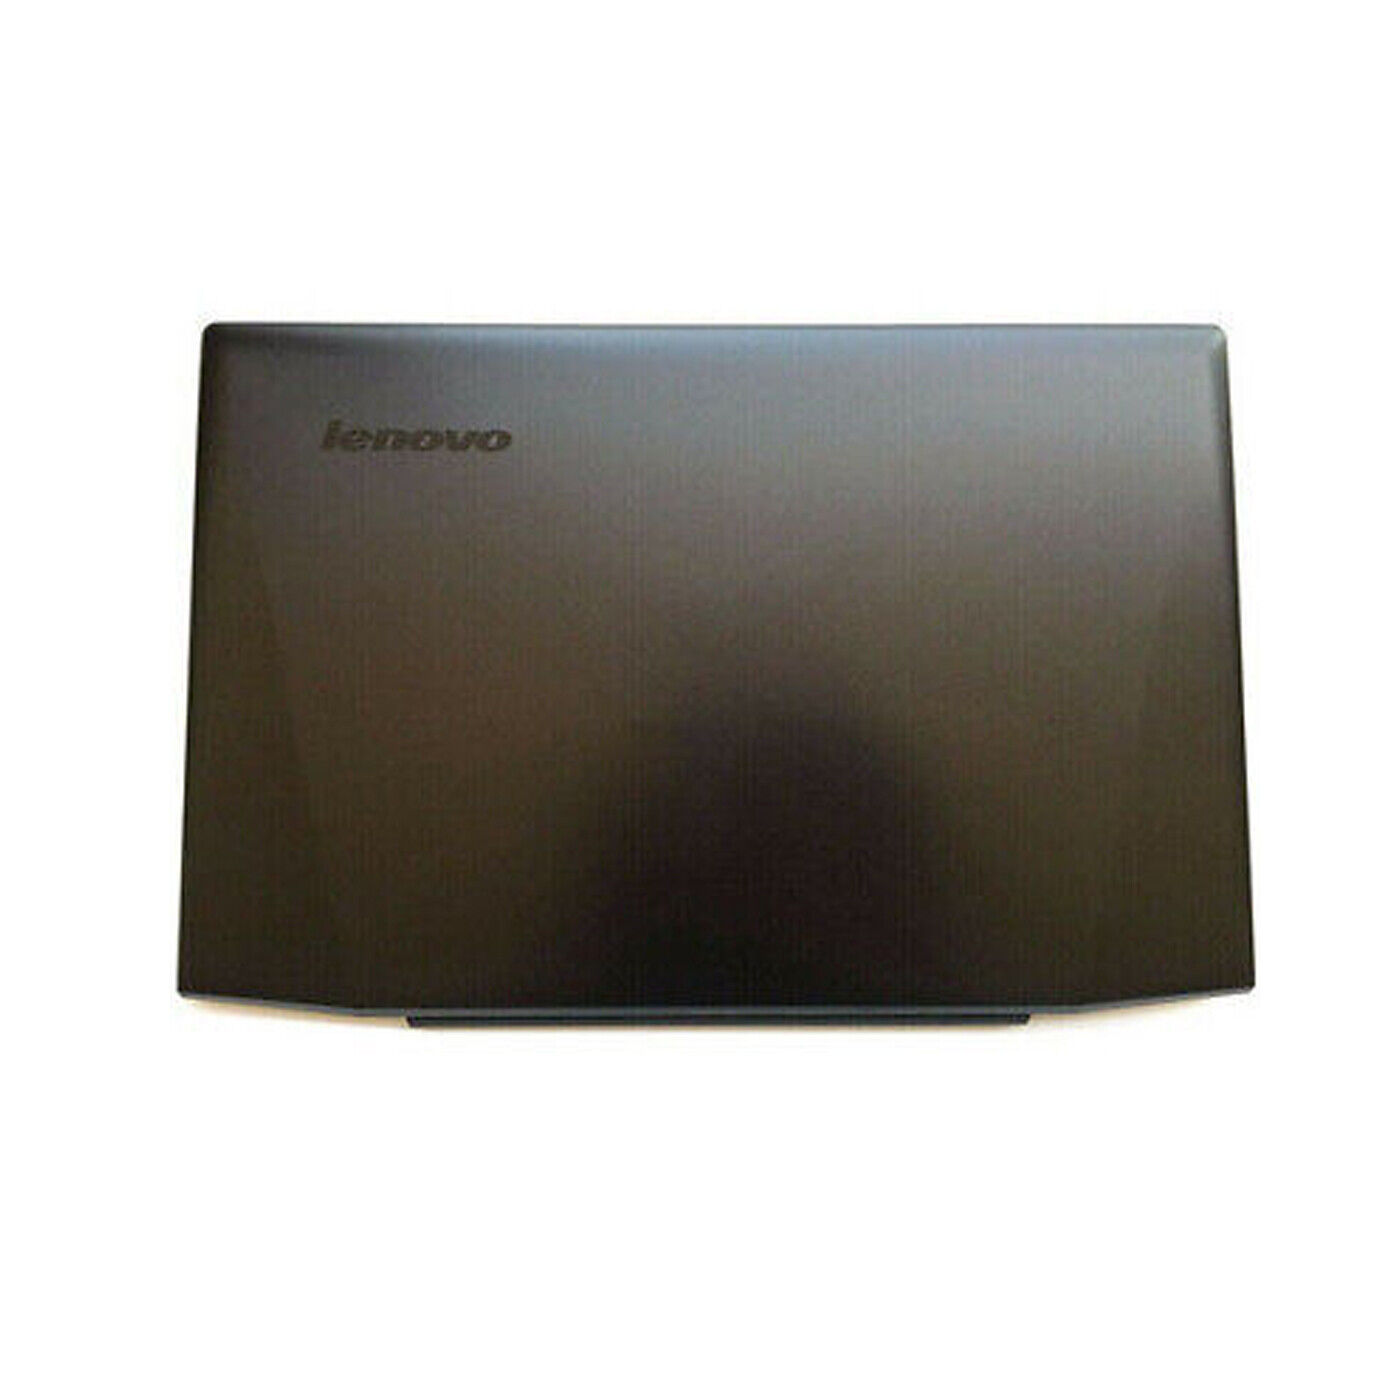 New Top Back Cover Rear Lid Case for Lenovo Y50-70 15.6\